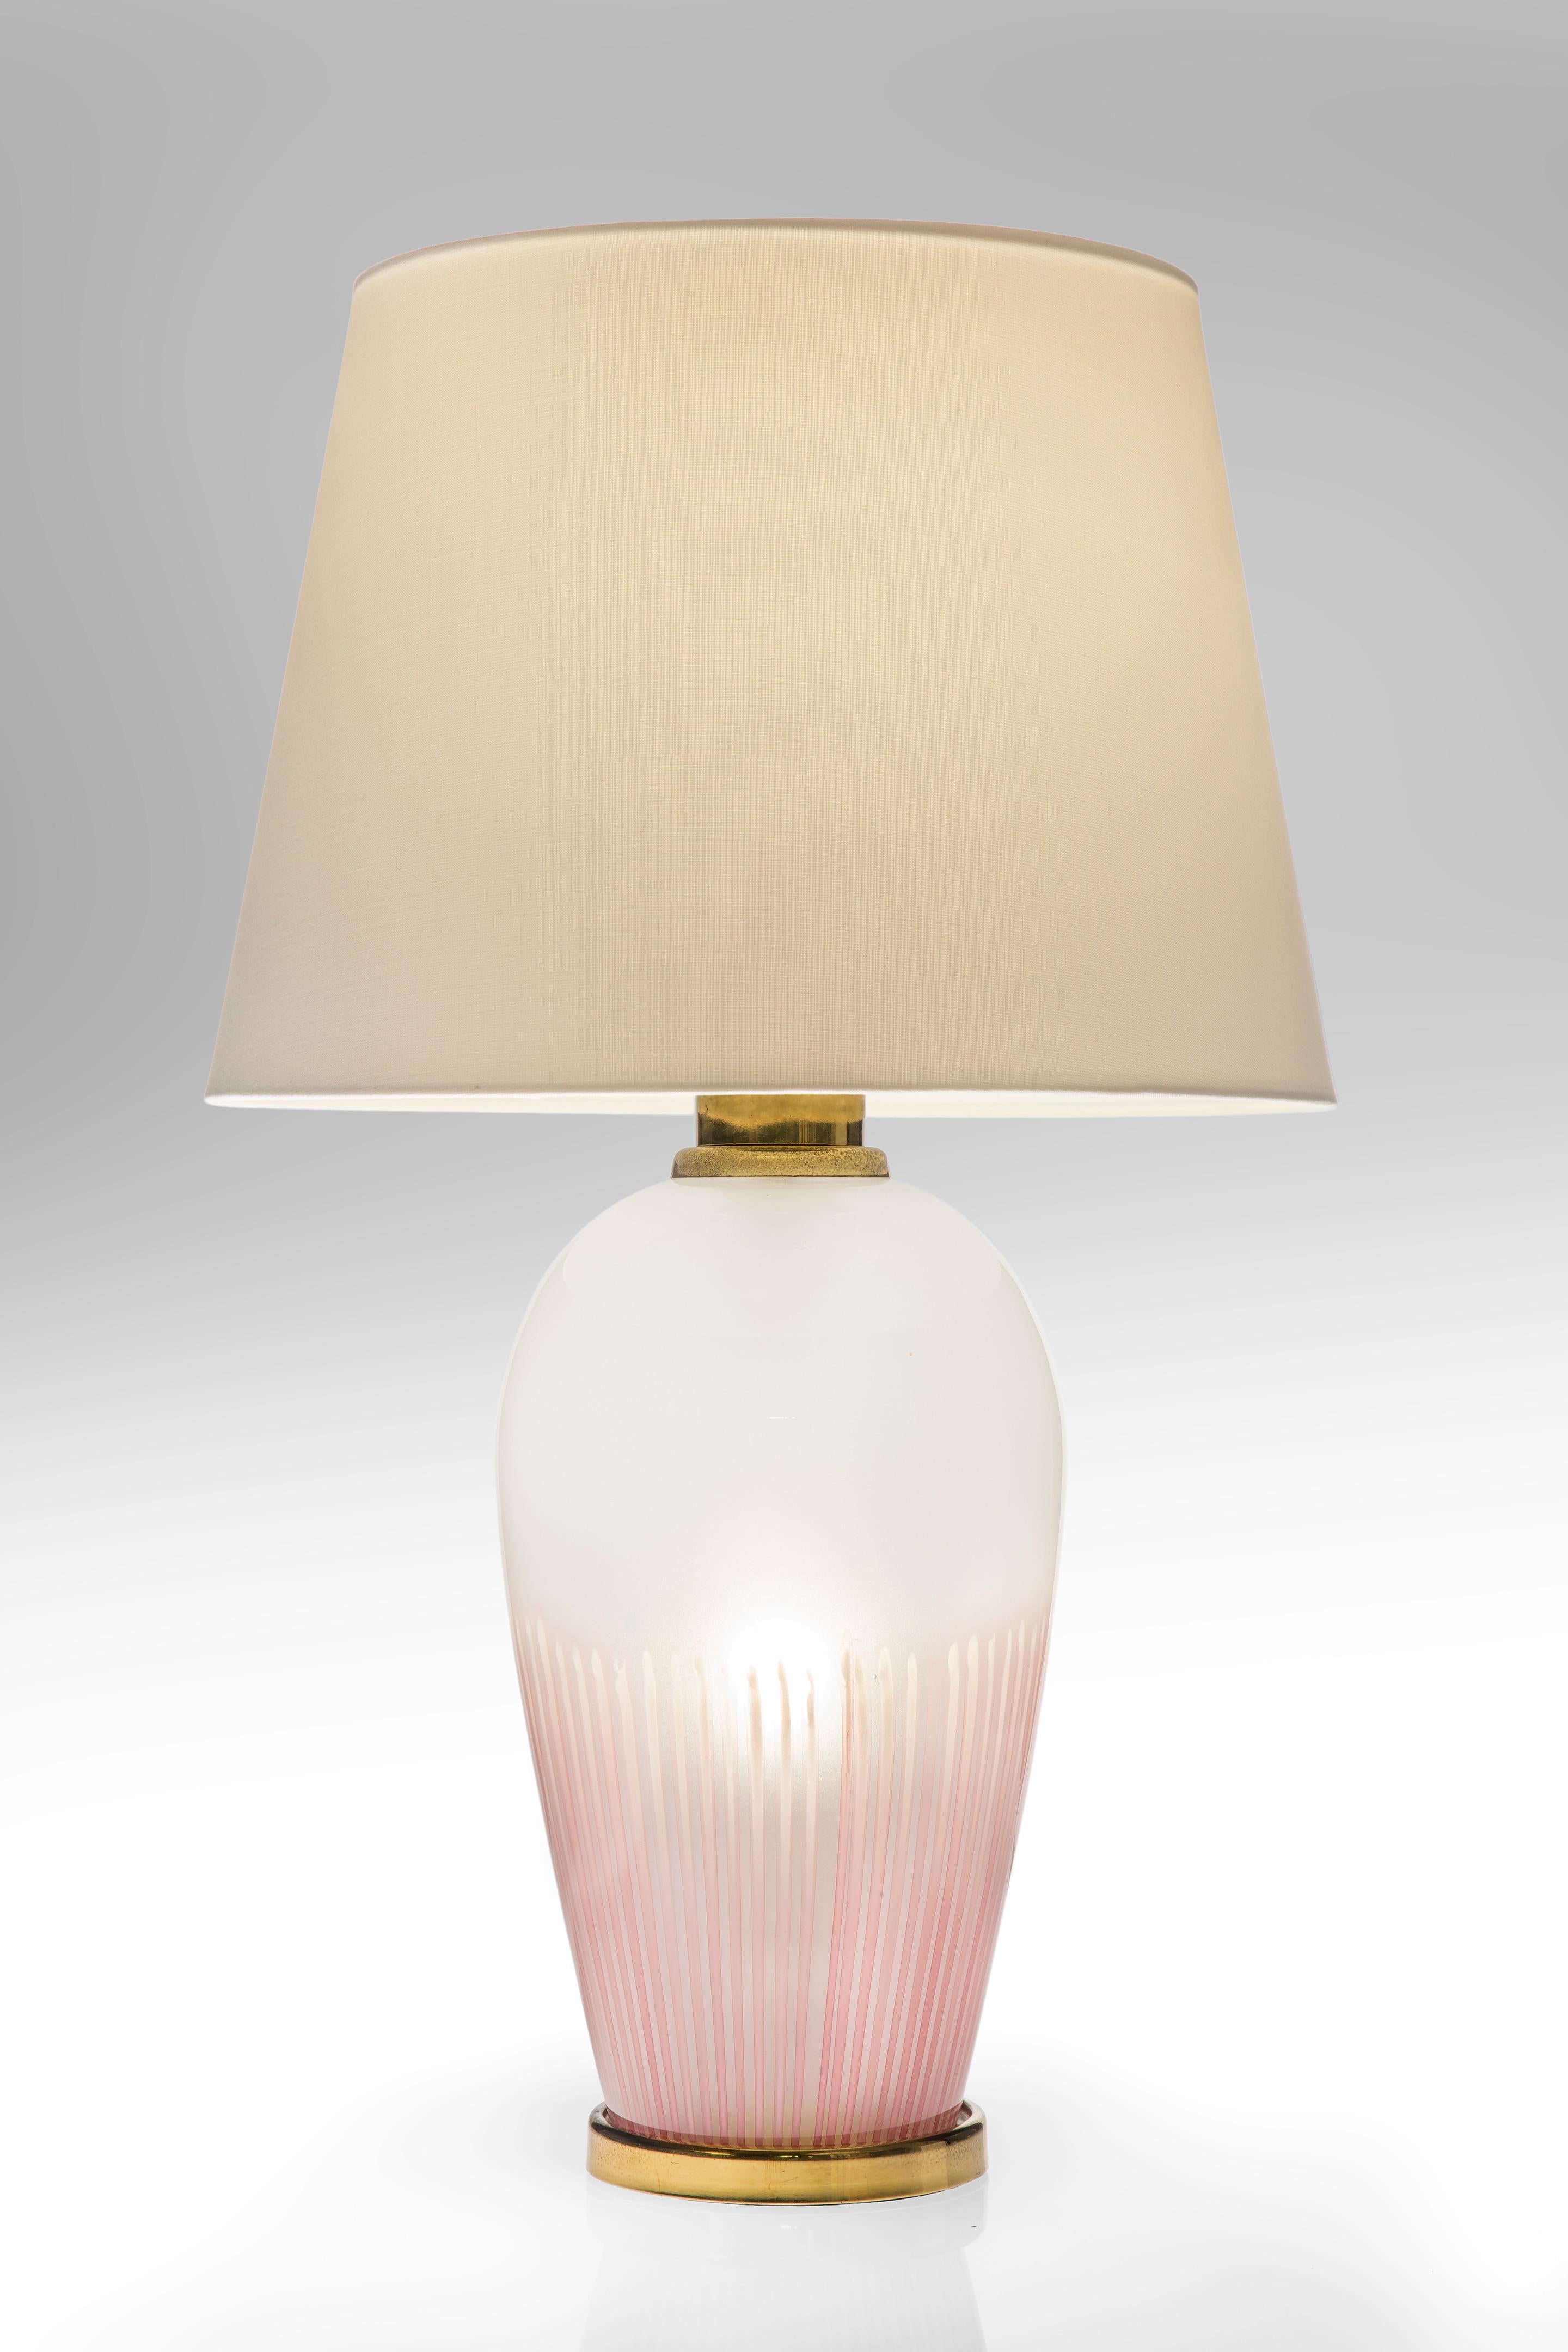 Pair of Italian frosted and colored glass lamps
Mid-20th century
As they say variety is the spice of life so a pair of glass lamps of different but complimentary colors ... why not! Each ovoid lamp of brass-mounted frosted glass one with yellow